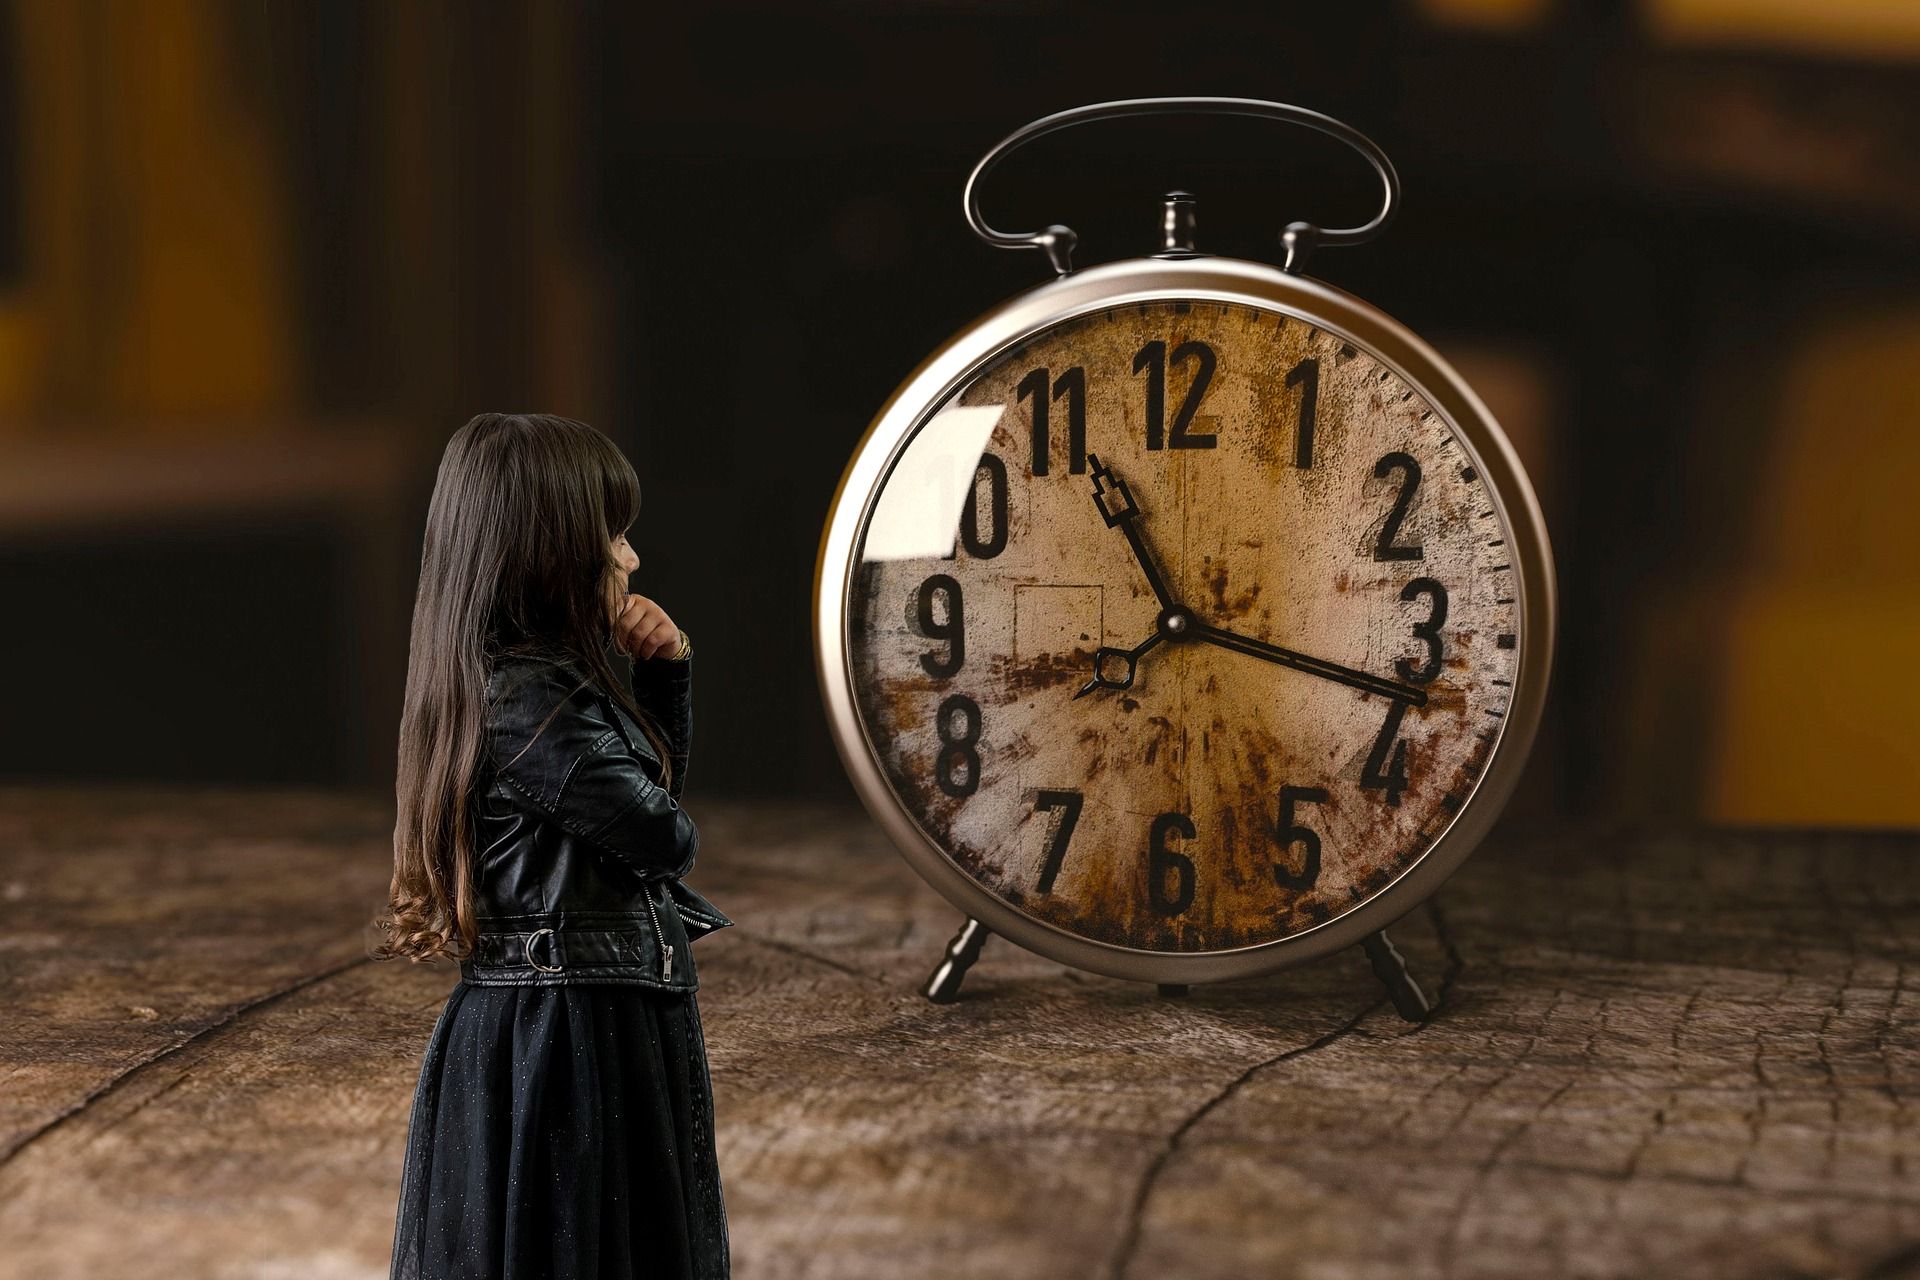 Small girl in black standing in front of a large alarm clock.